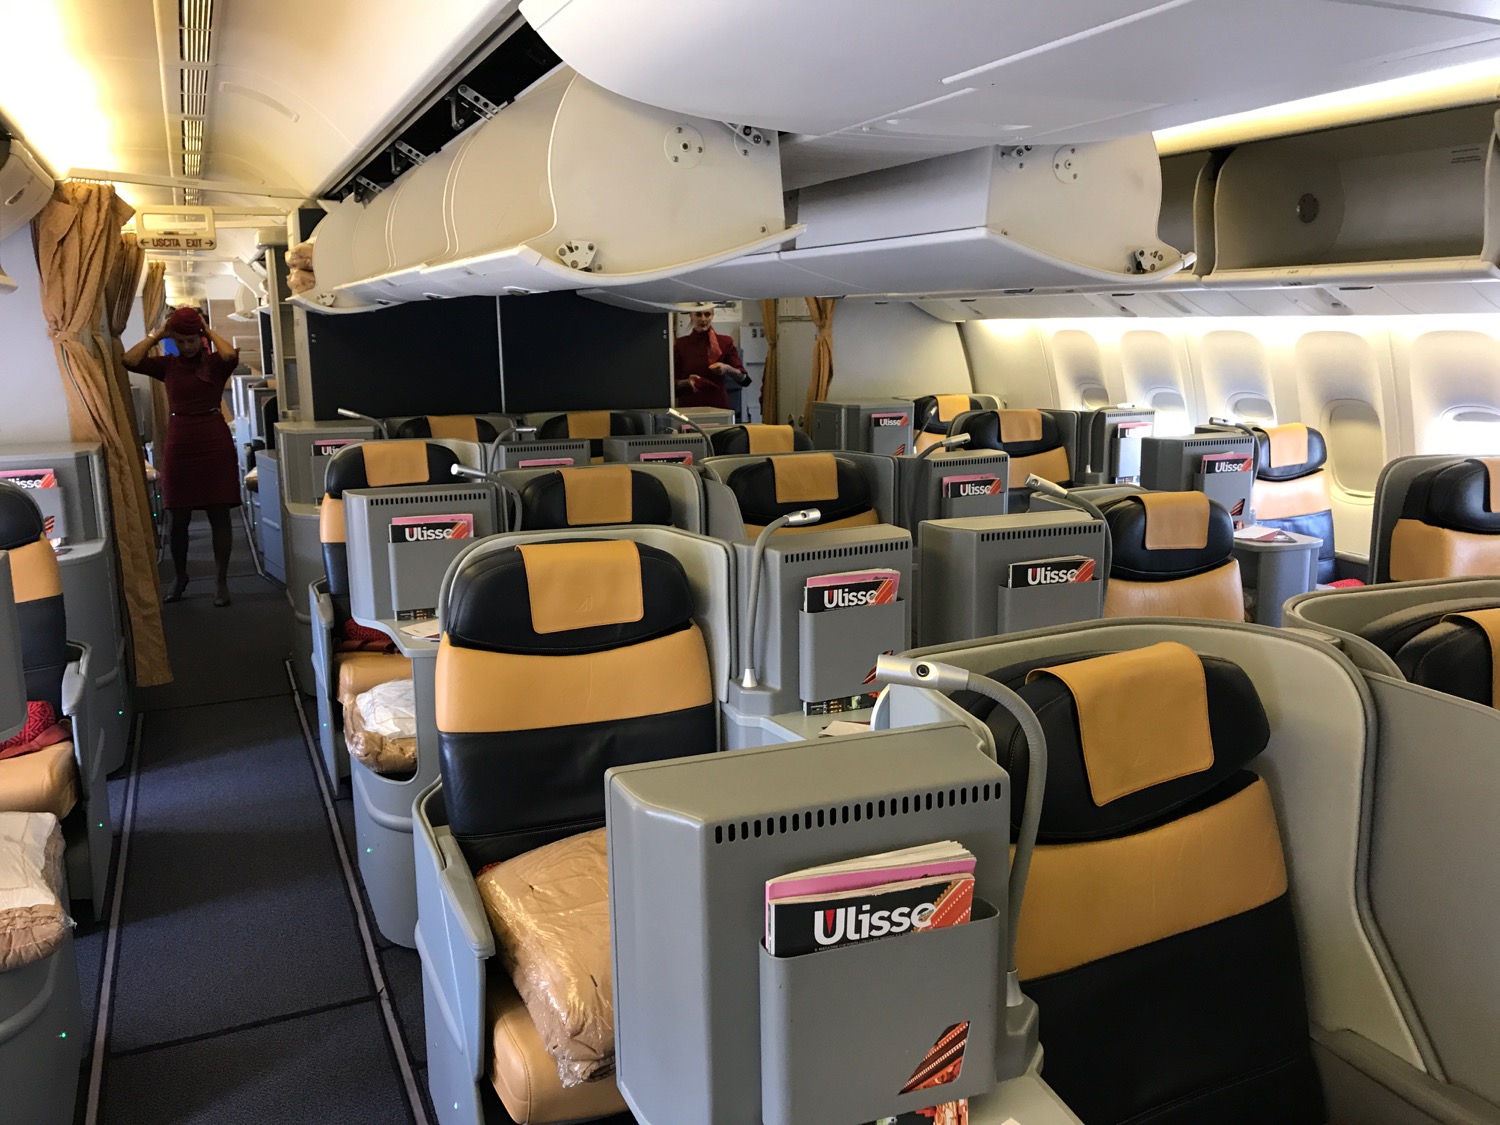 Magnifico! Alitalia Business Class from Rome to LA Live and Let's Fly